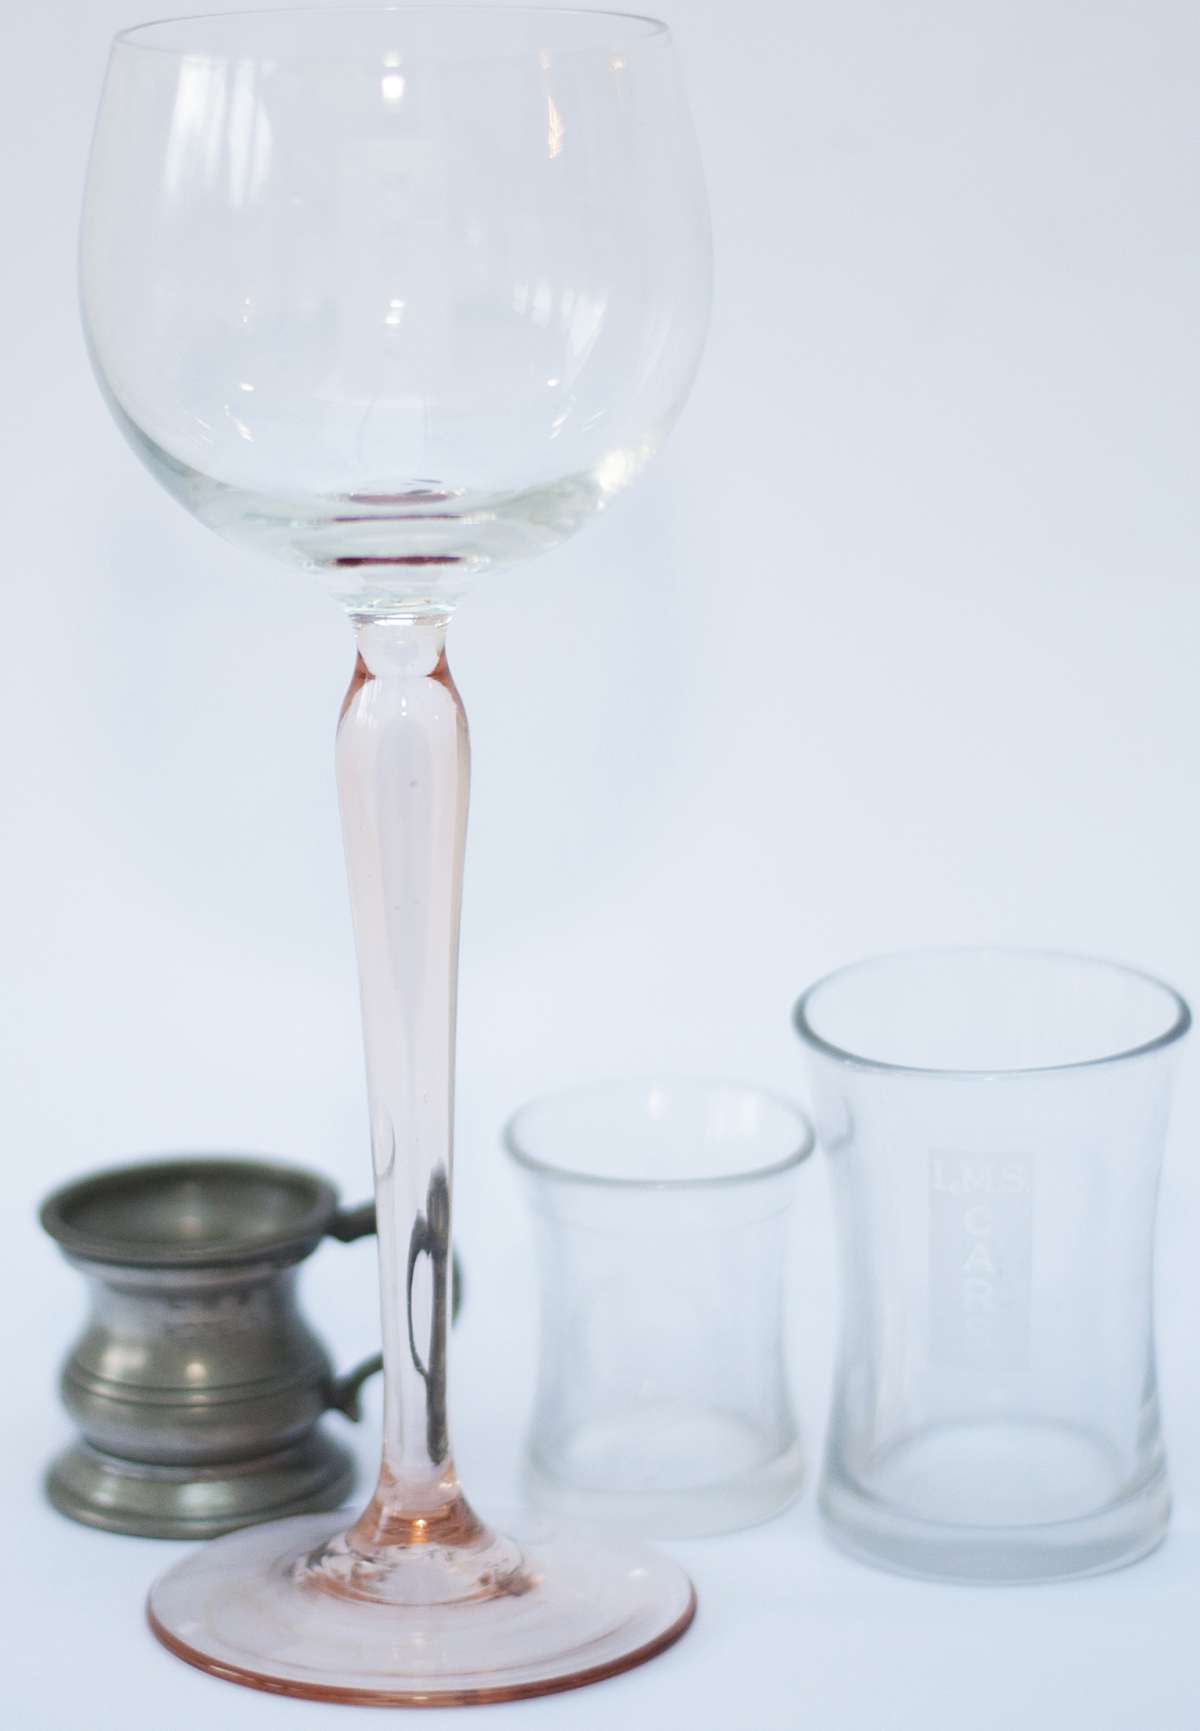 LMS spirit glasses and measures: one small glass marked LMS CARS with laurel leaf, 2in tall; one